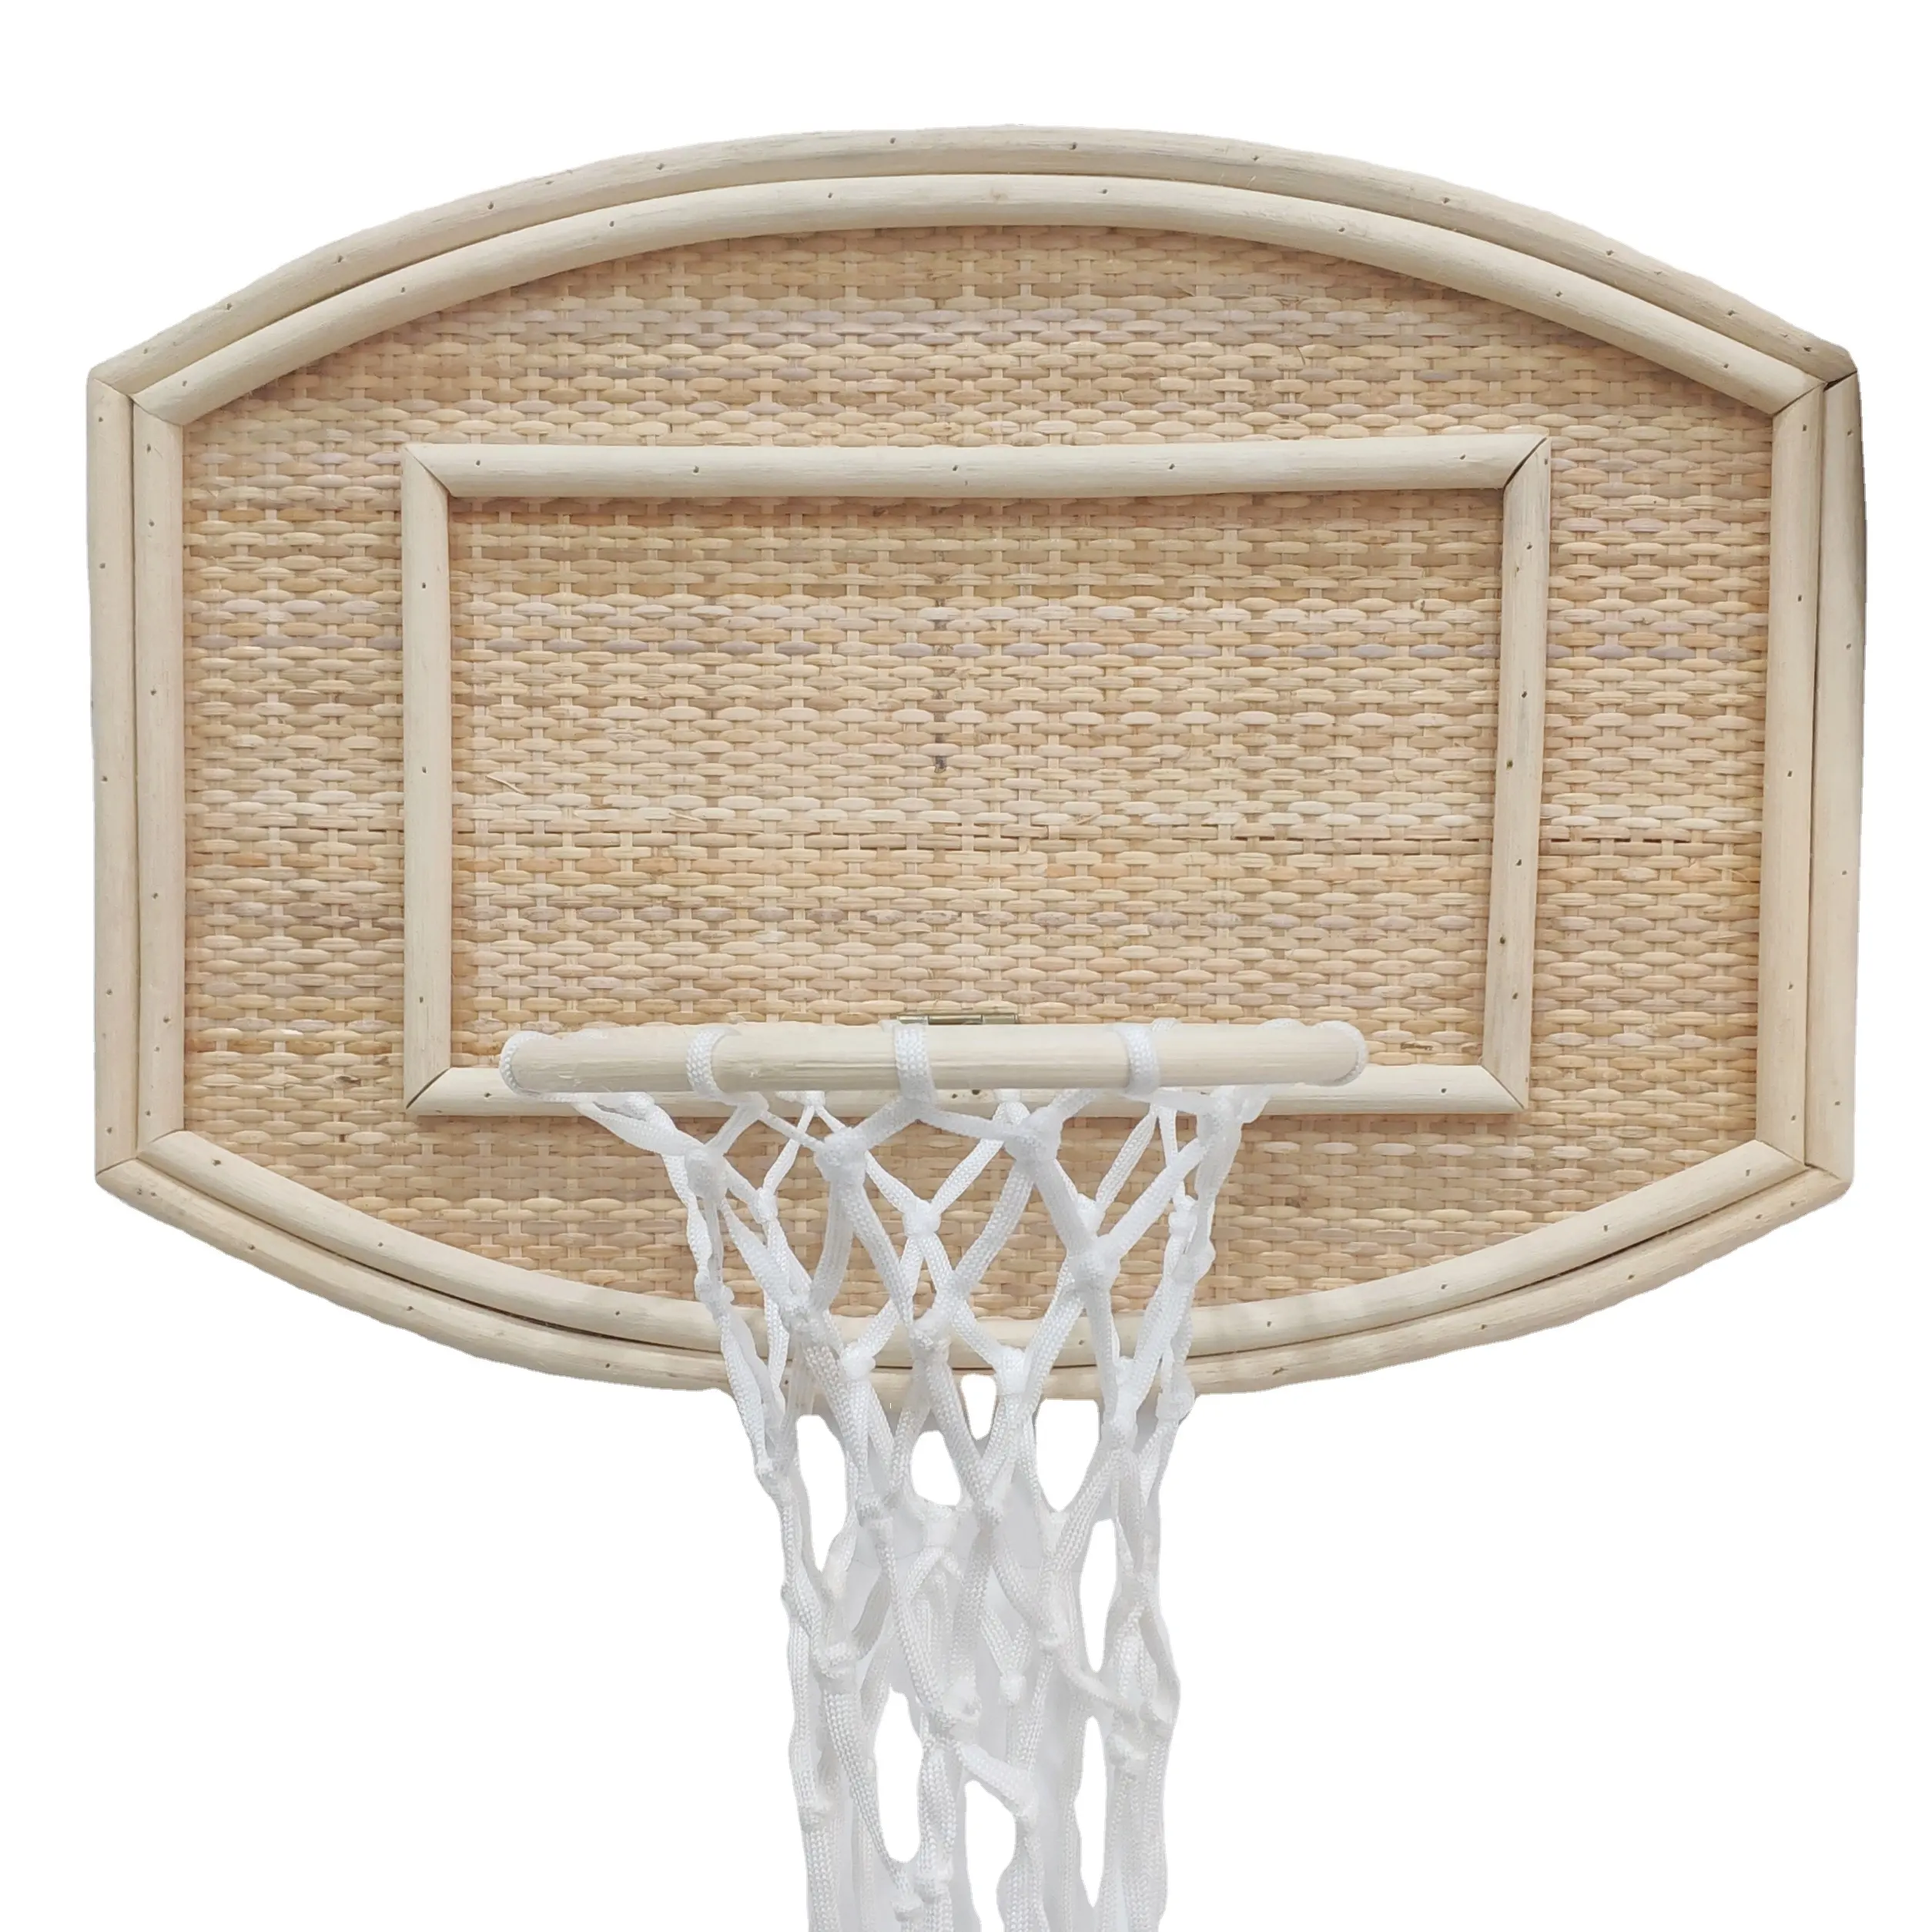 Wholesale Rattan Kids Toys High Quality Indoor Basketball Stand Hoop For Wall Decor Handmade Kids Toddlers Play Toys